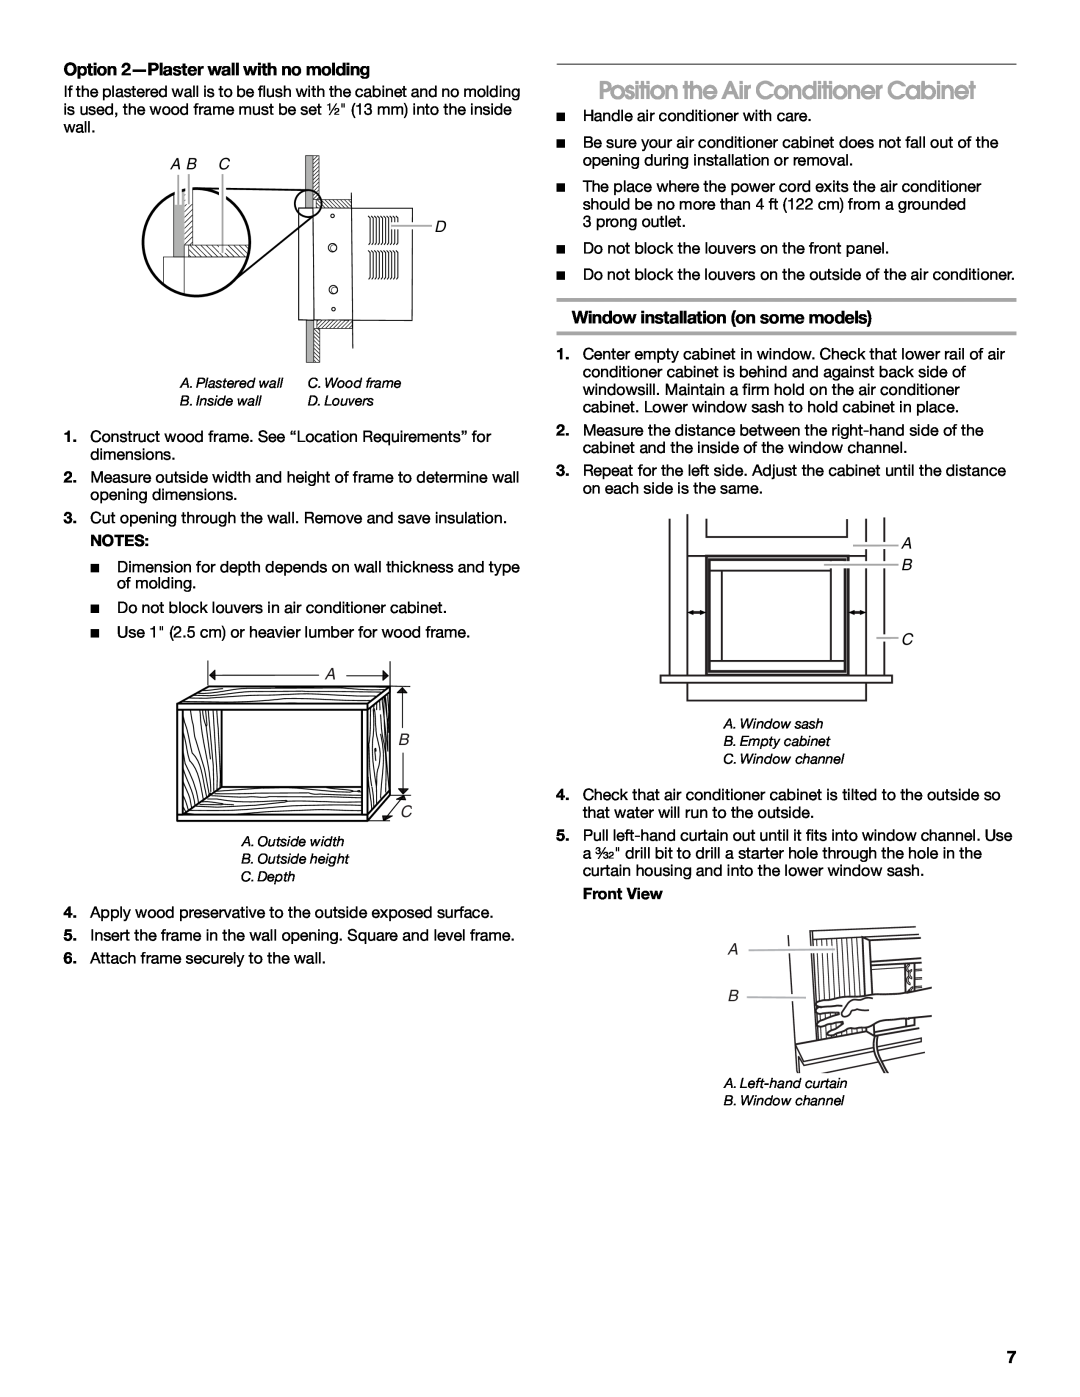 Whirlpool ACE082XP1 manual Position the Air Conditioner Cabinet, Option 2-Plasterwall with no molding, A B C D 